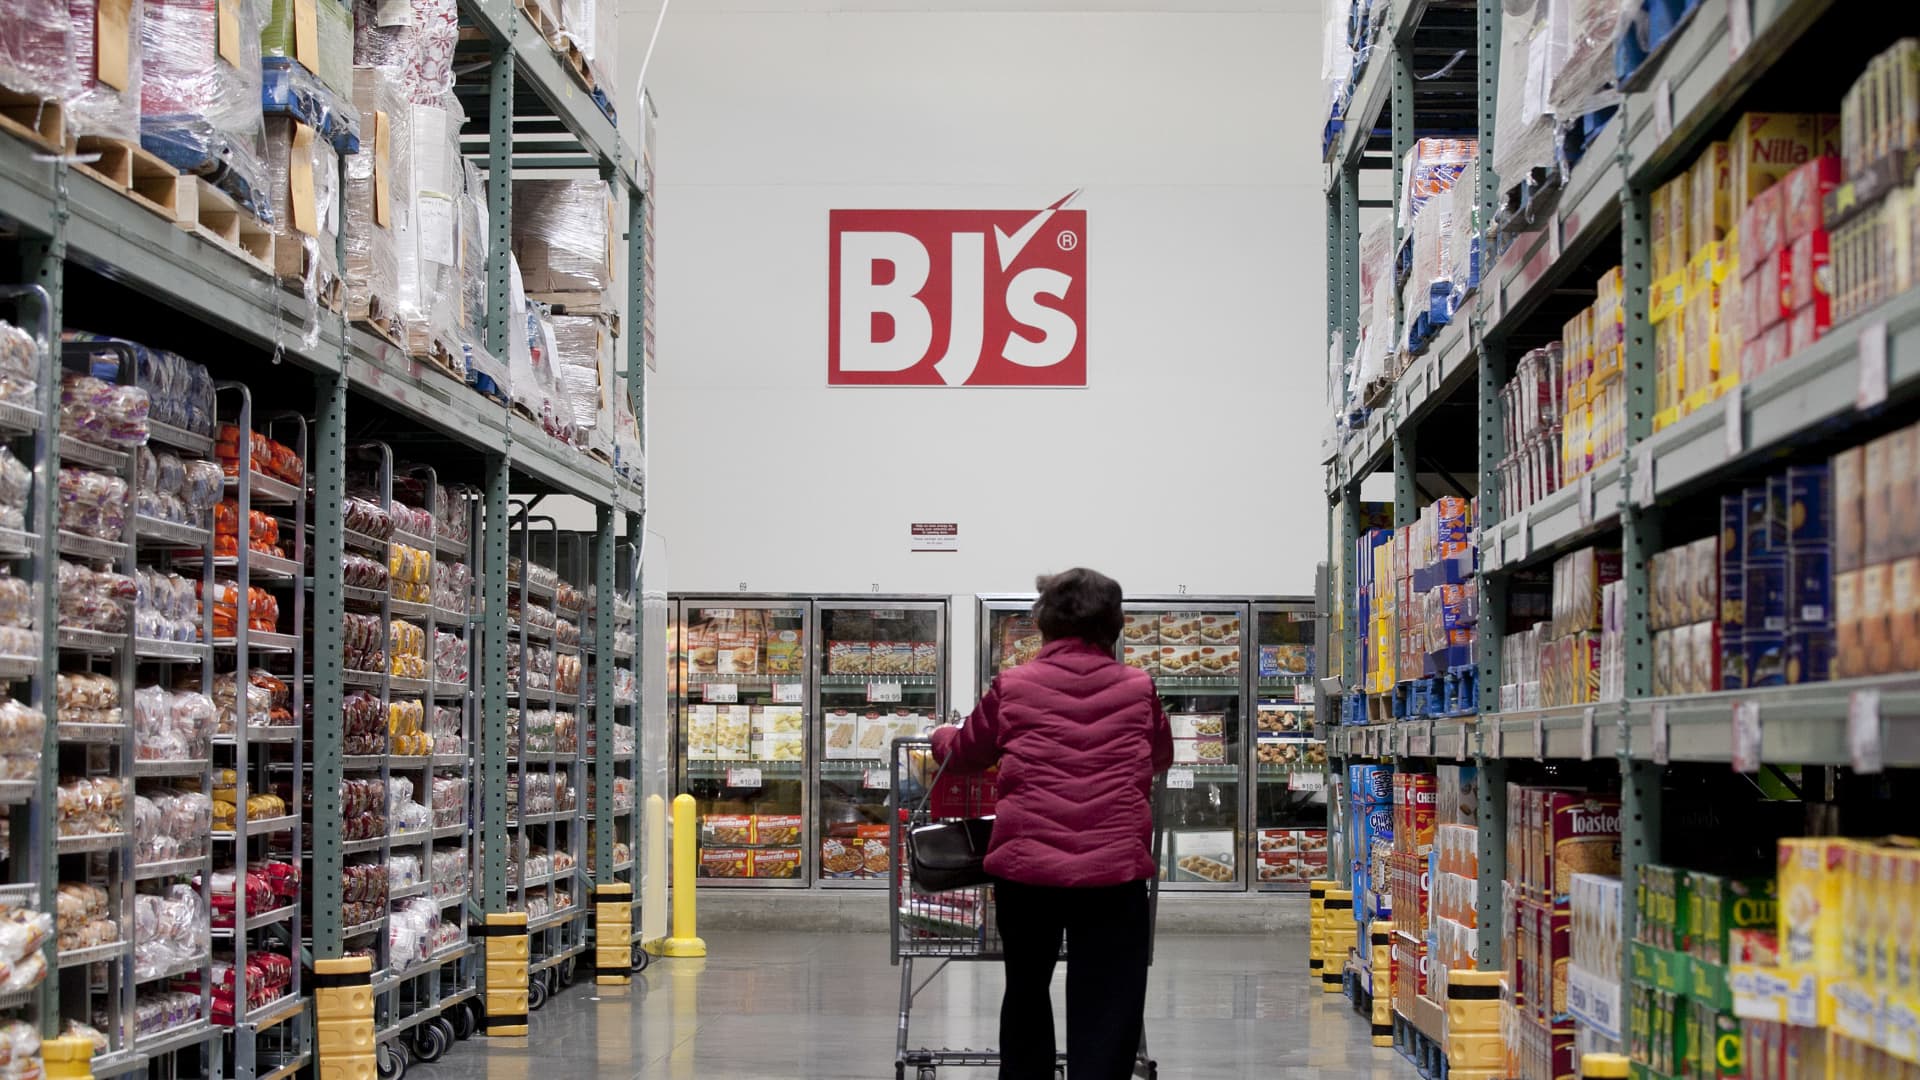 Stocks making the biggest moves midday: Cisco, BJ’s Wholesale, Bed Bath & Beyond, Kohl’s and more